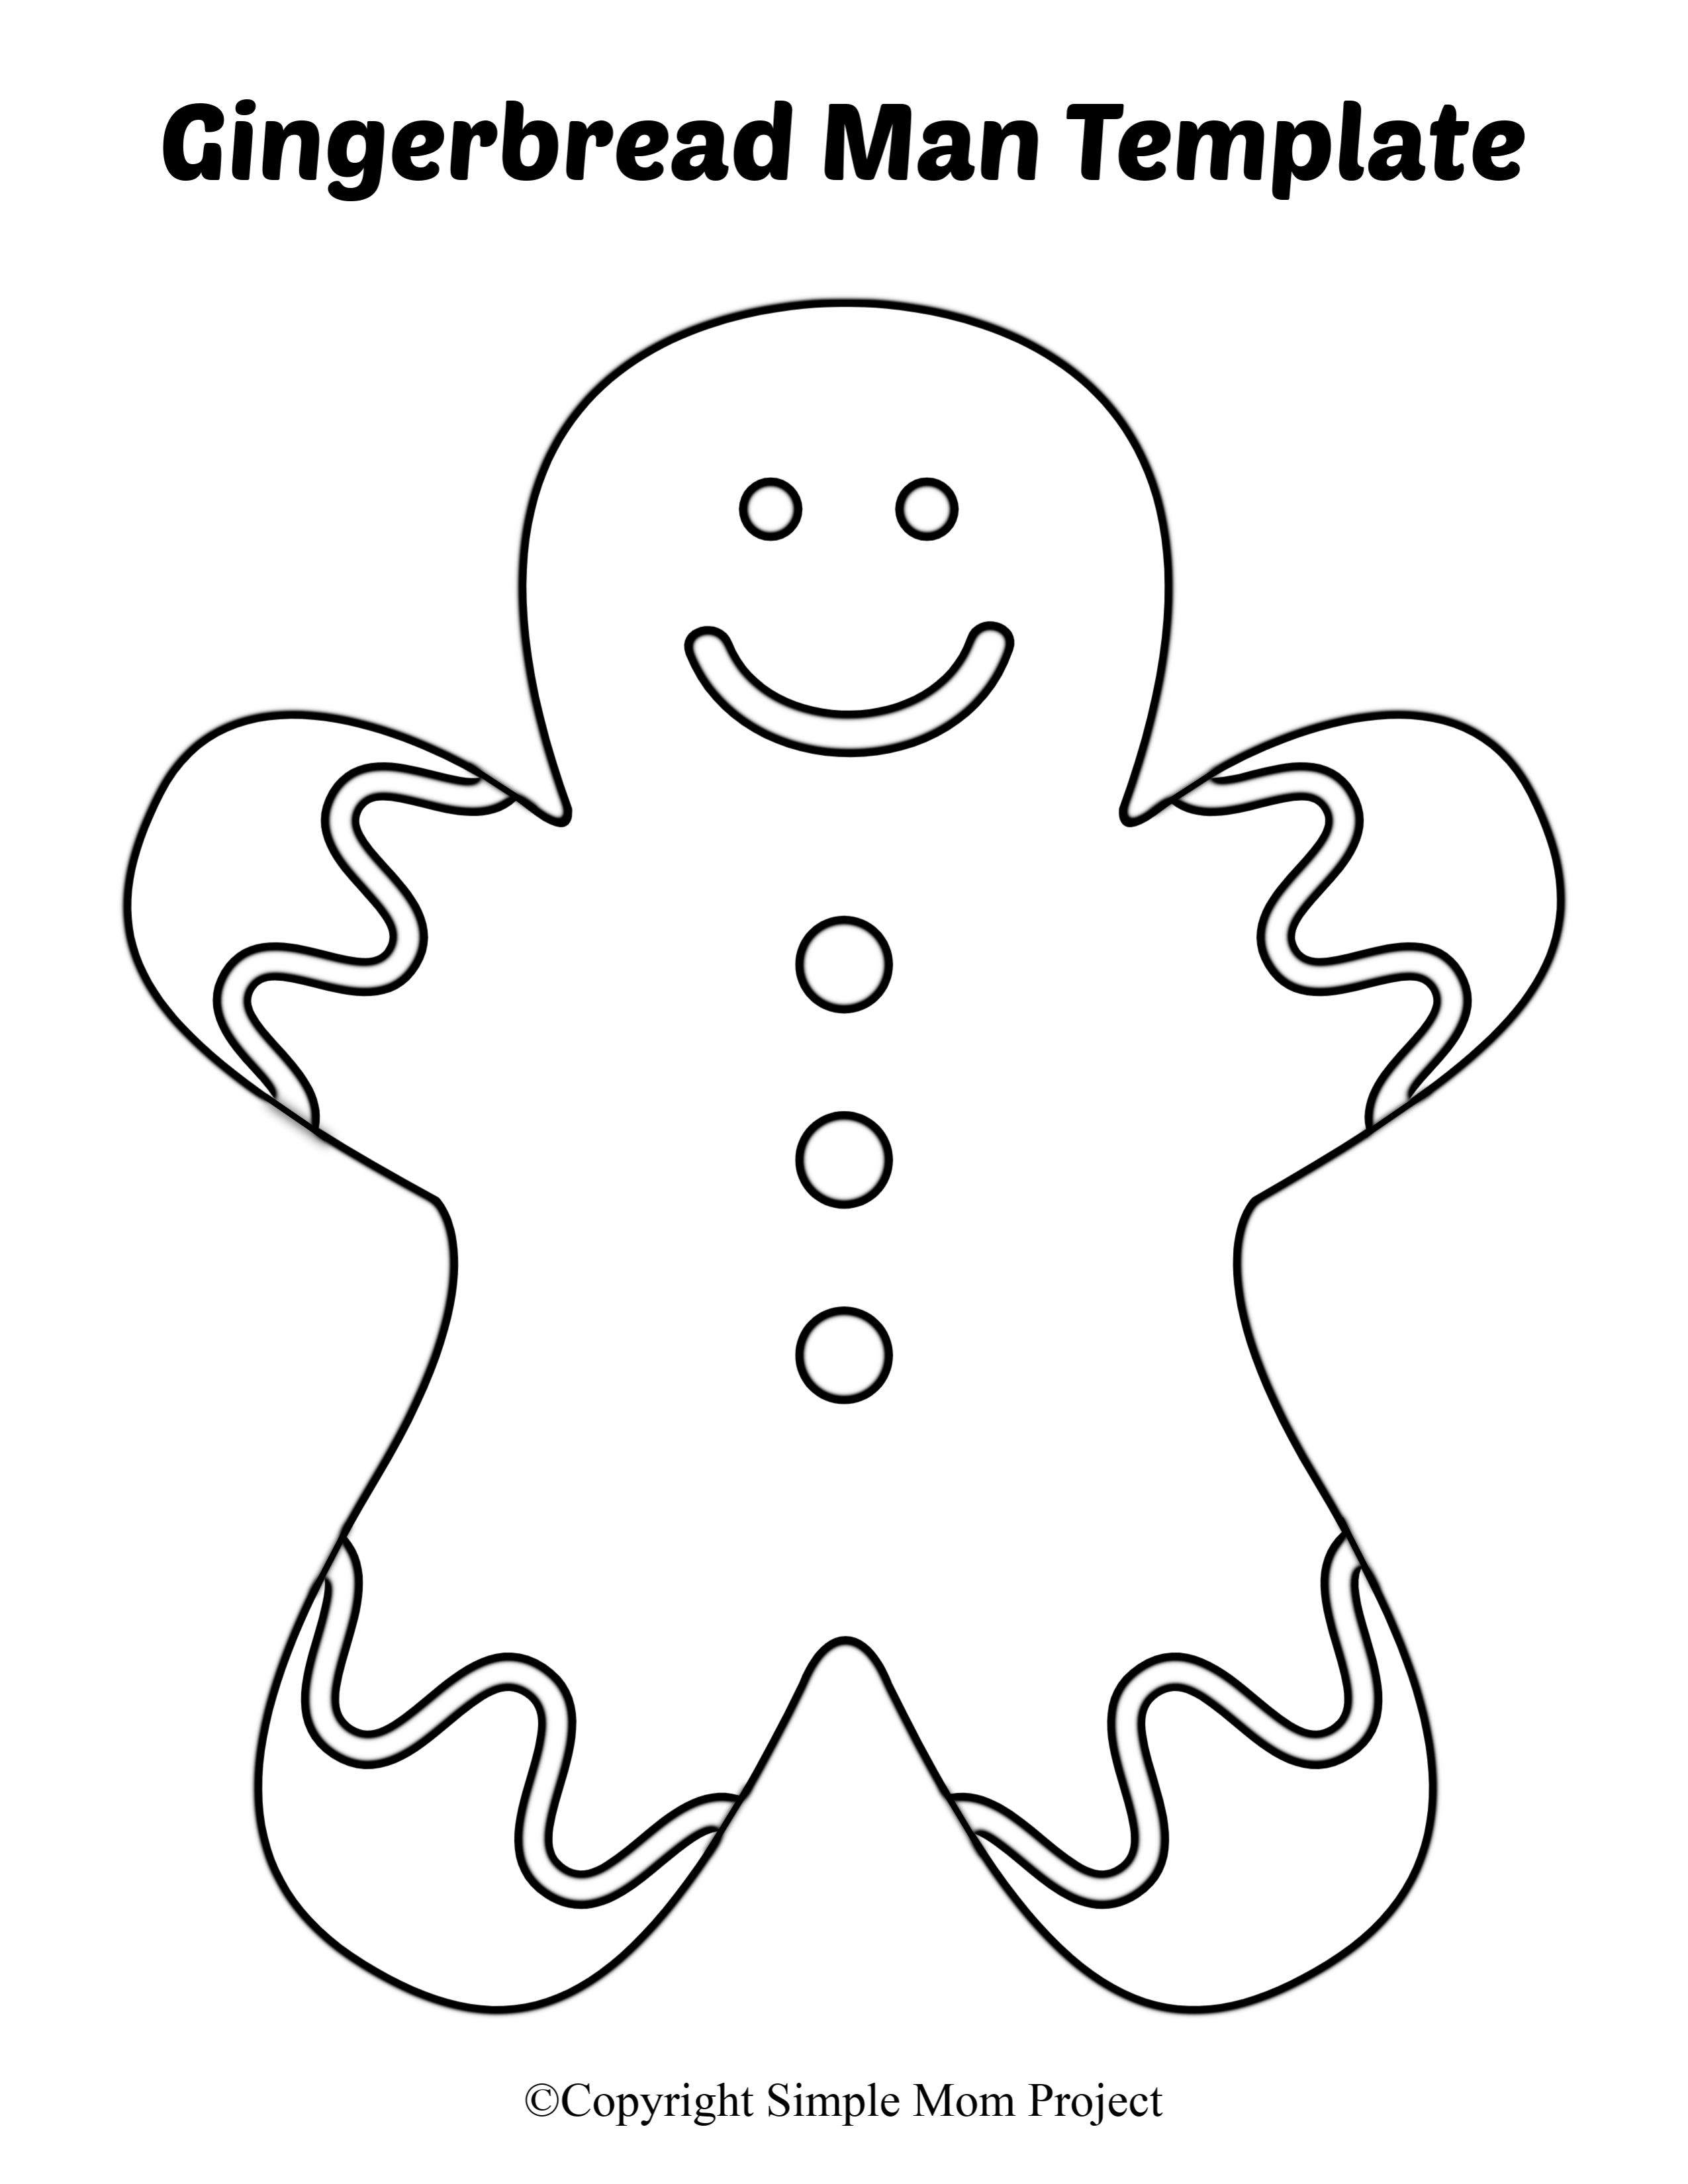 Festive gingerbread man templates for holiday crafts and coloring